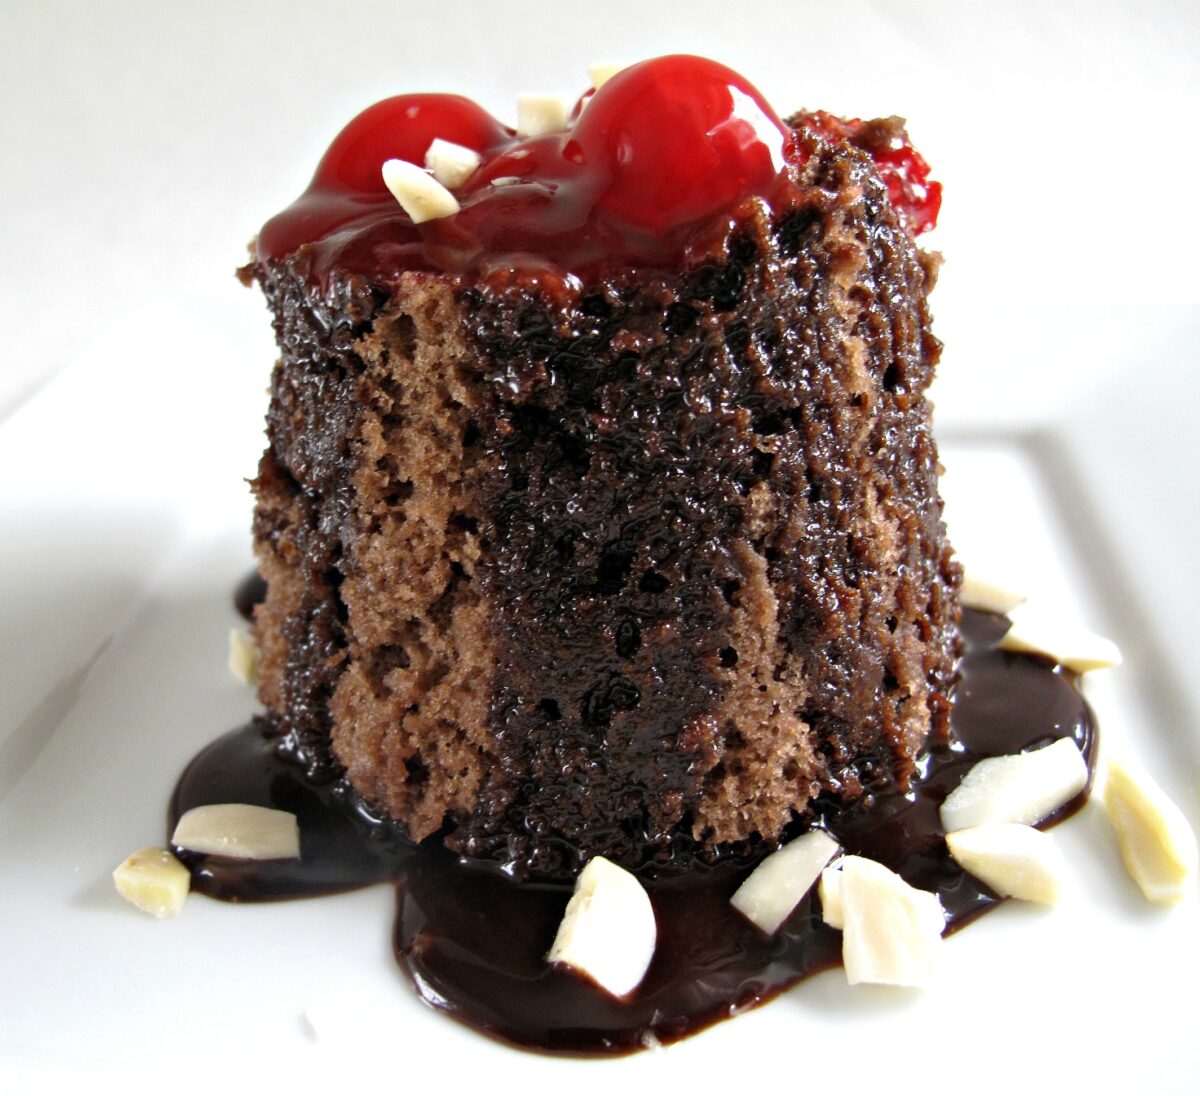 Chocolate mug cake on a plate topped with cherry pie filling, chocolate sauce, and almonds.